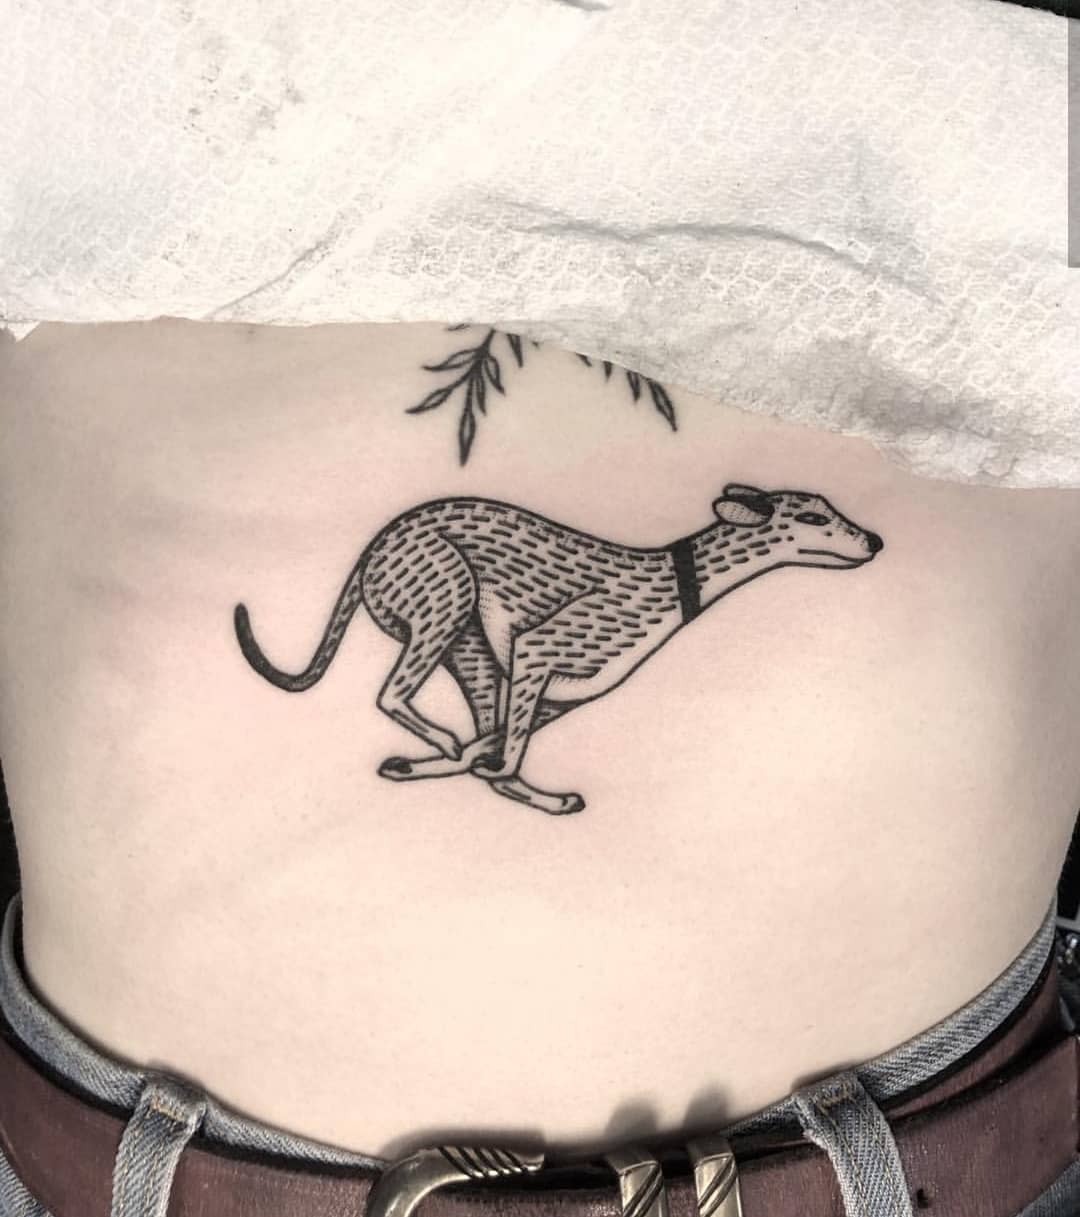 Running dog tattoo by Mikes Shaw